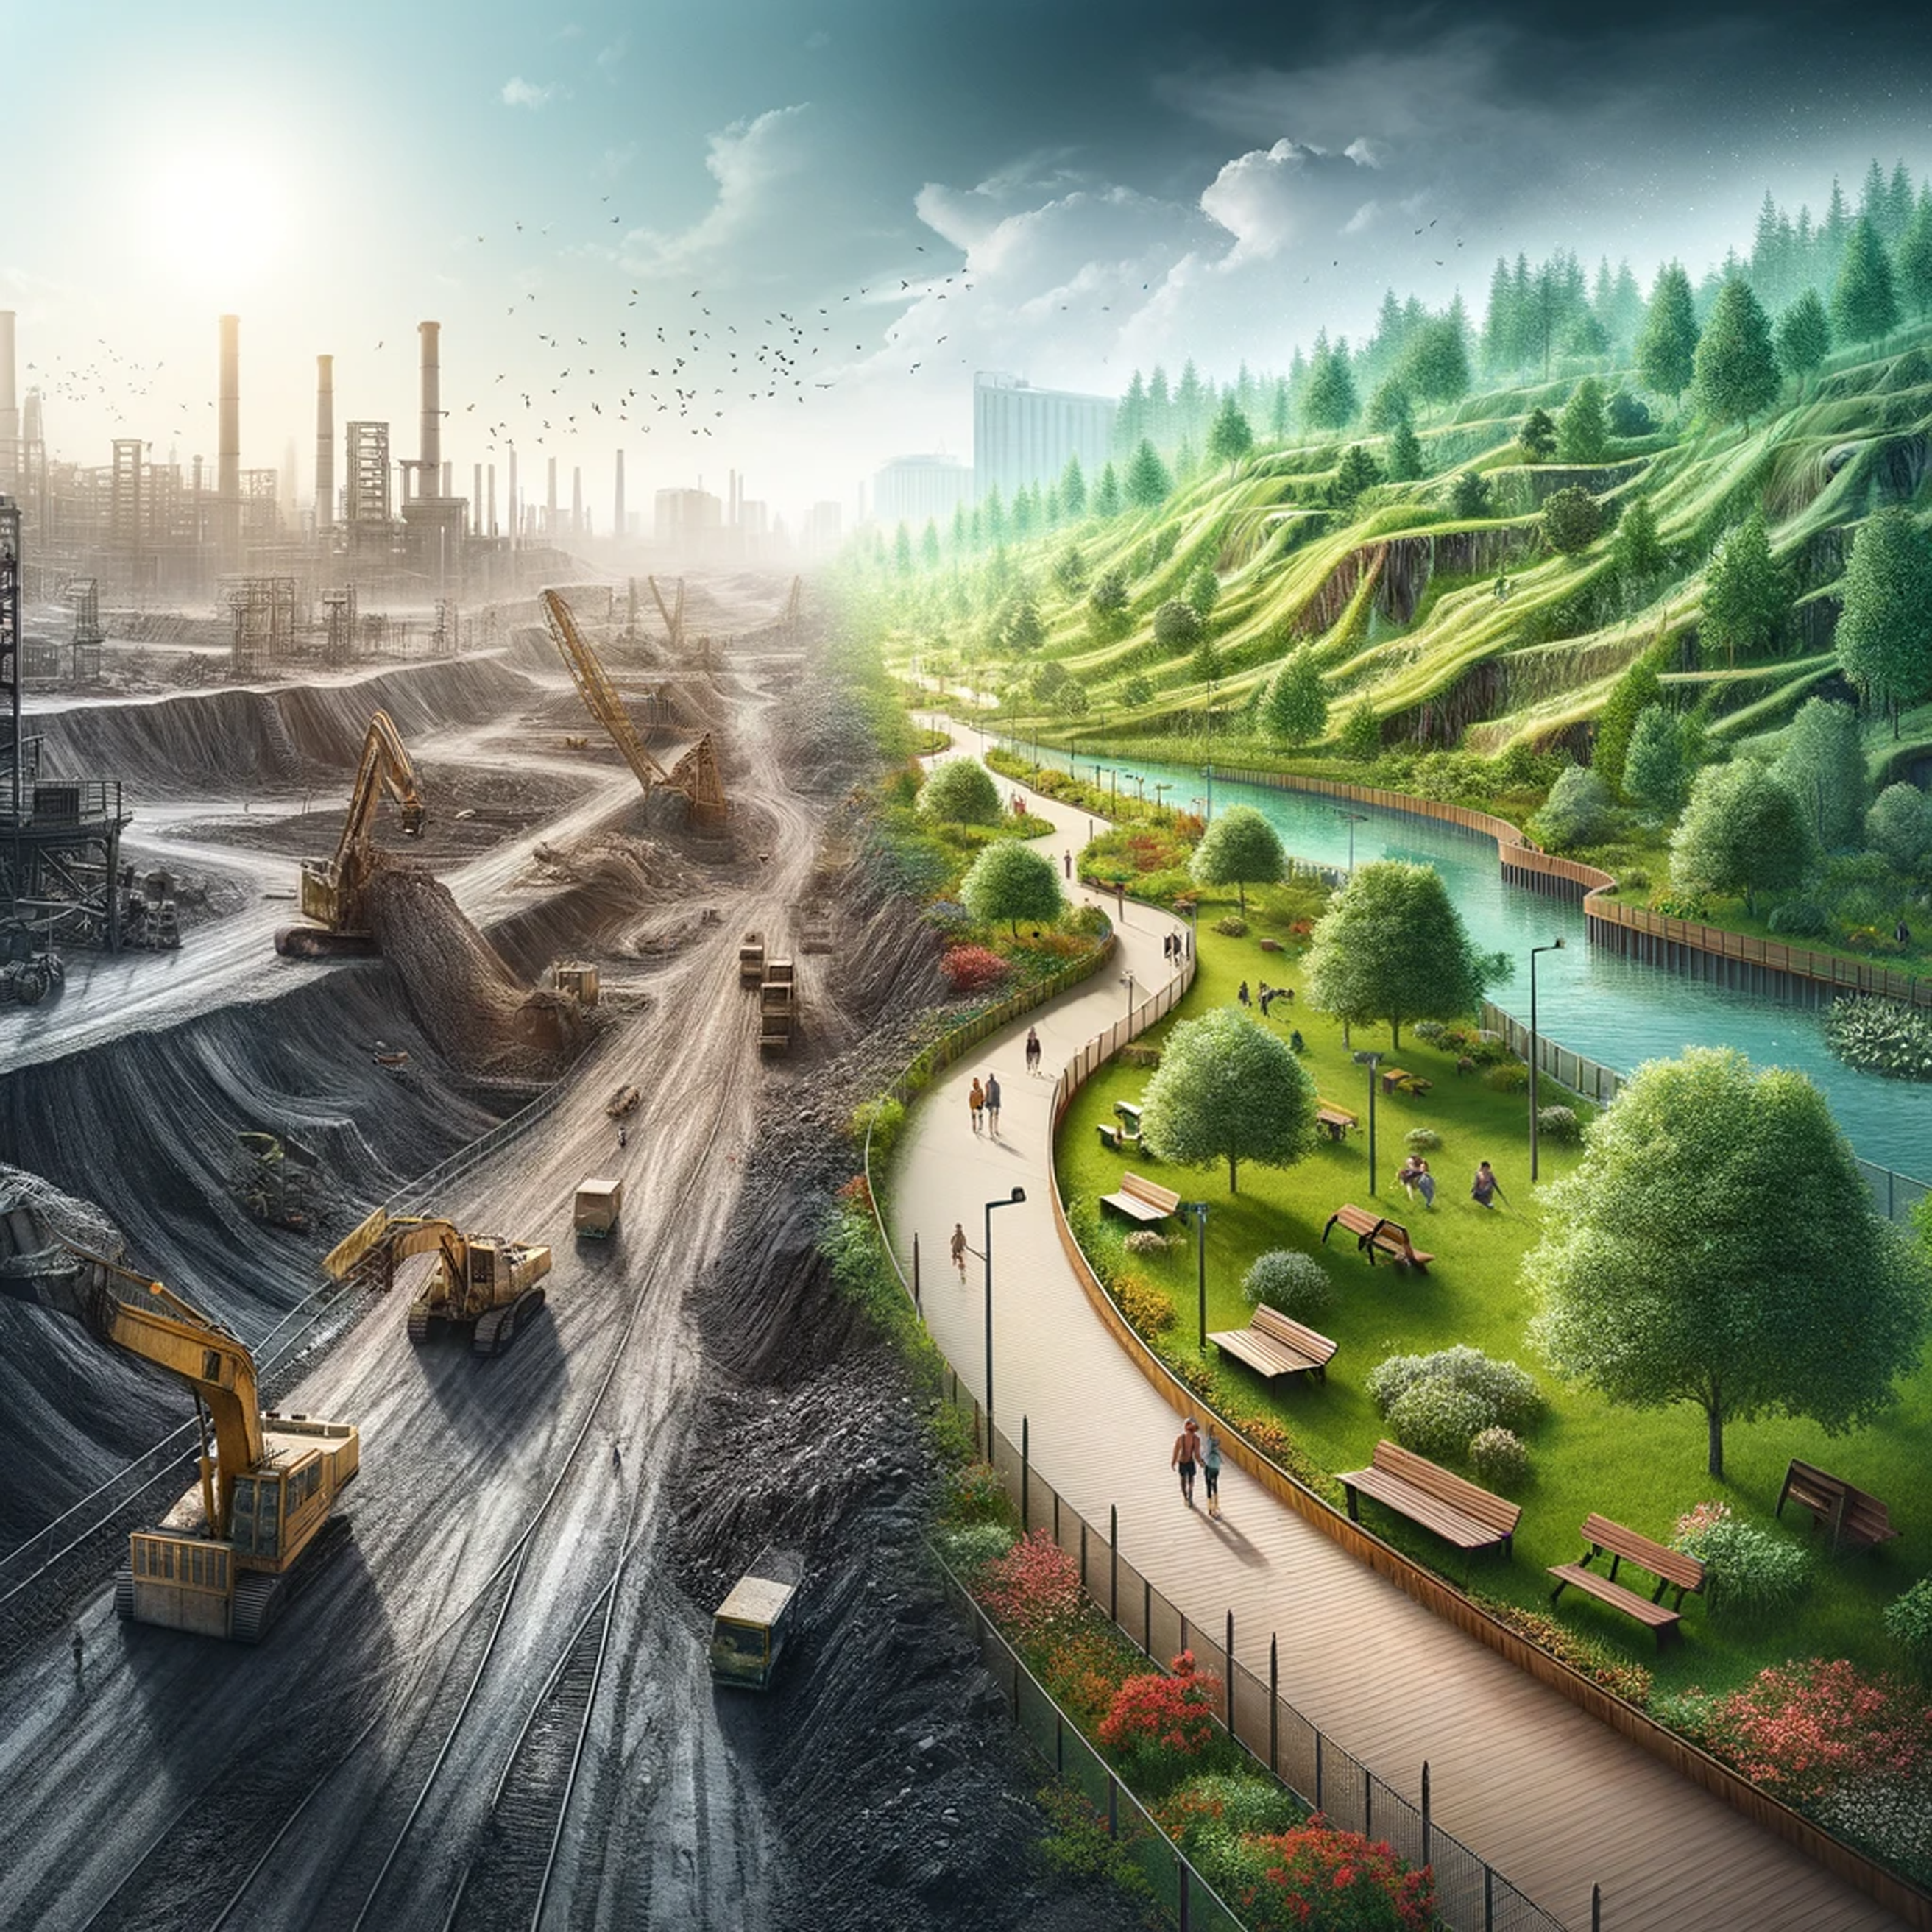 graphical abstract for What emerging technologies and innovations present opportunities for economic repurposing of mined land, assets, and waste materials? - open in full screen